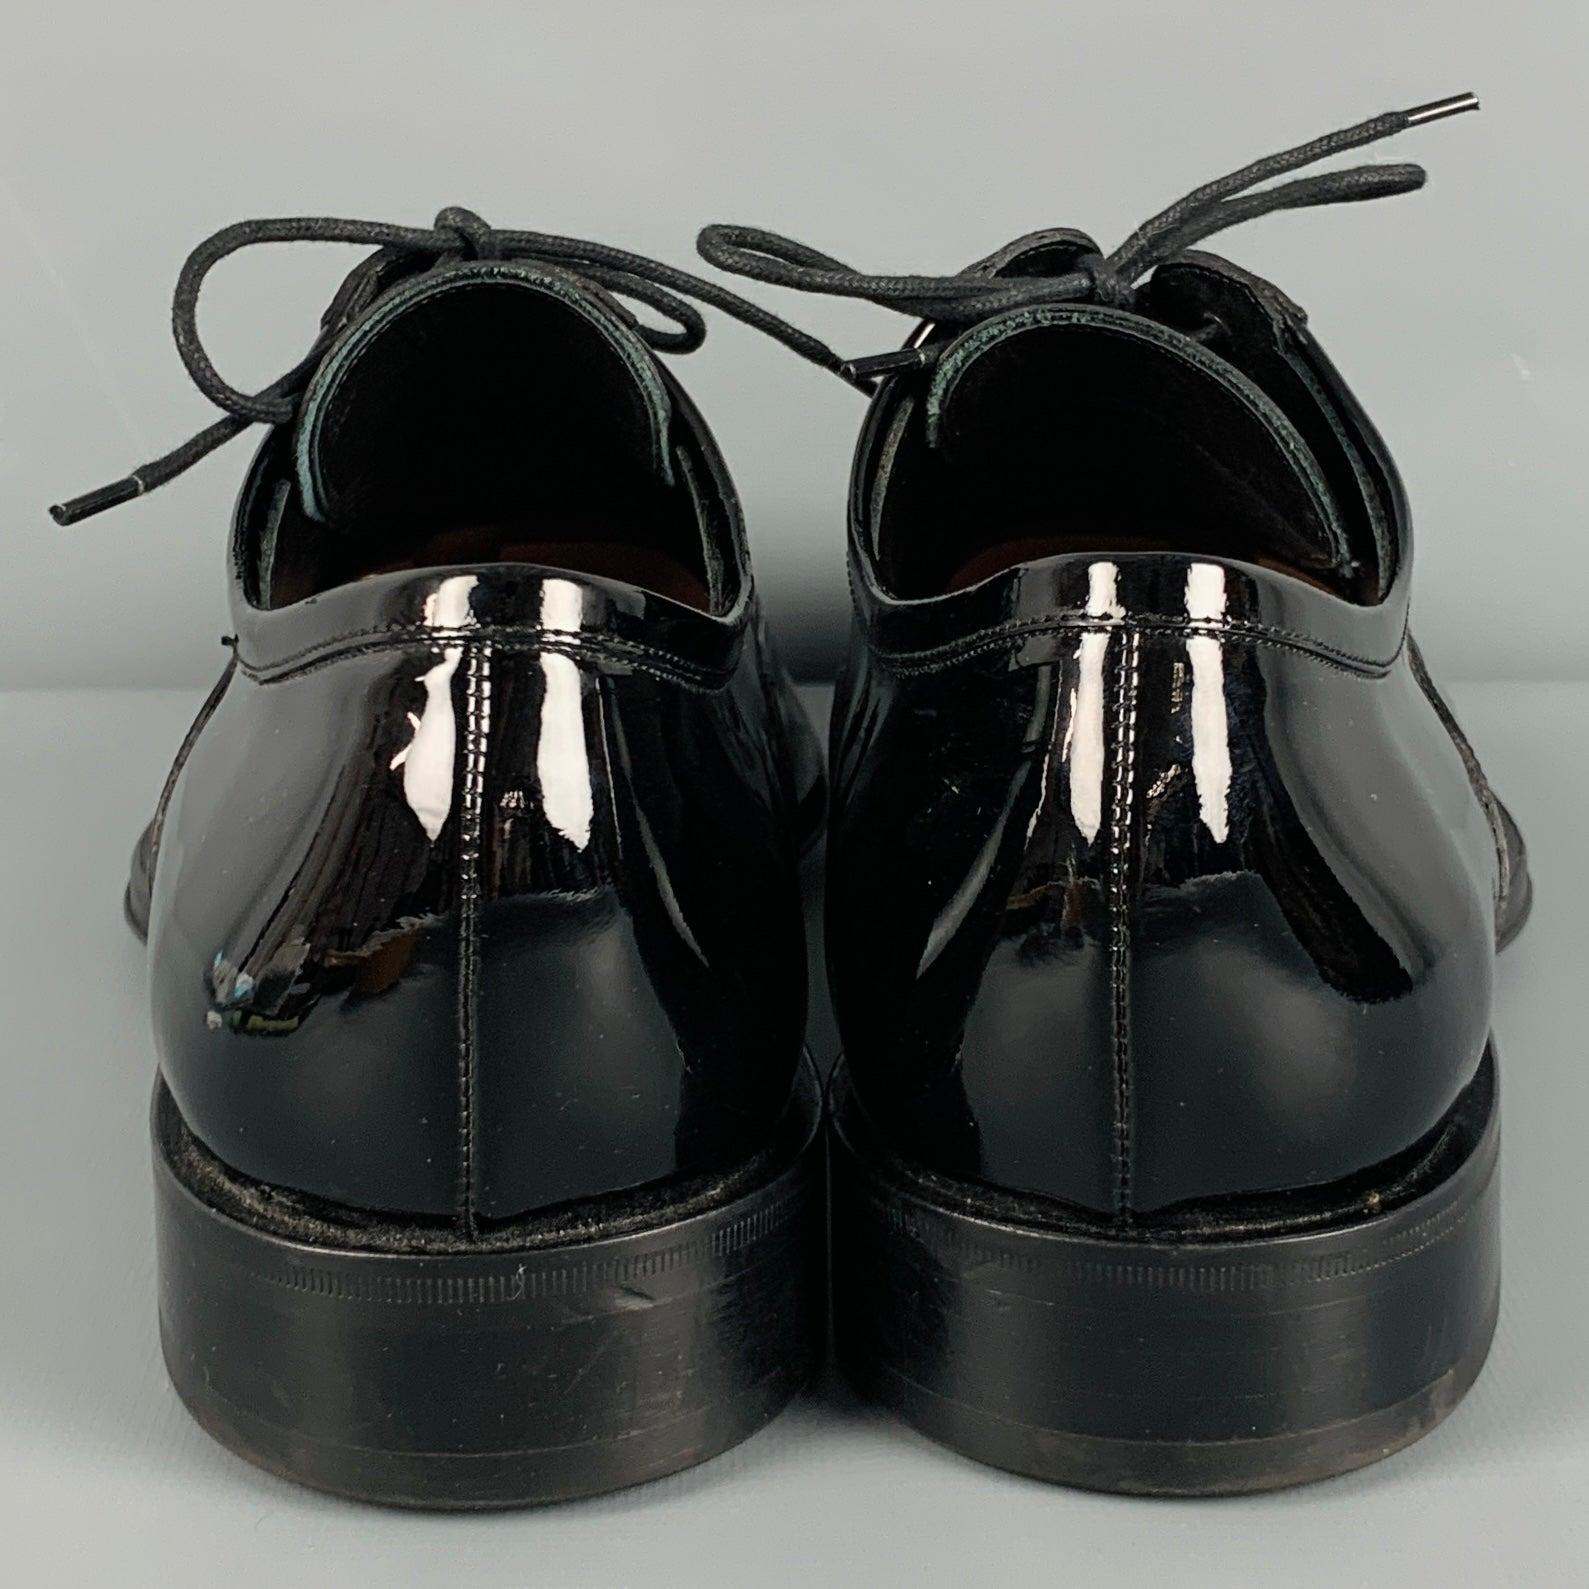 ALLEN EDMONDS Size 11 Black Patent Leather Lace-Up Shoes In Good Condition For Sale In San Francisco, CA